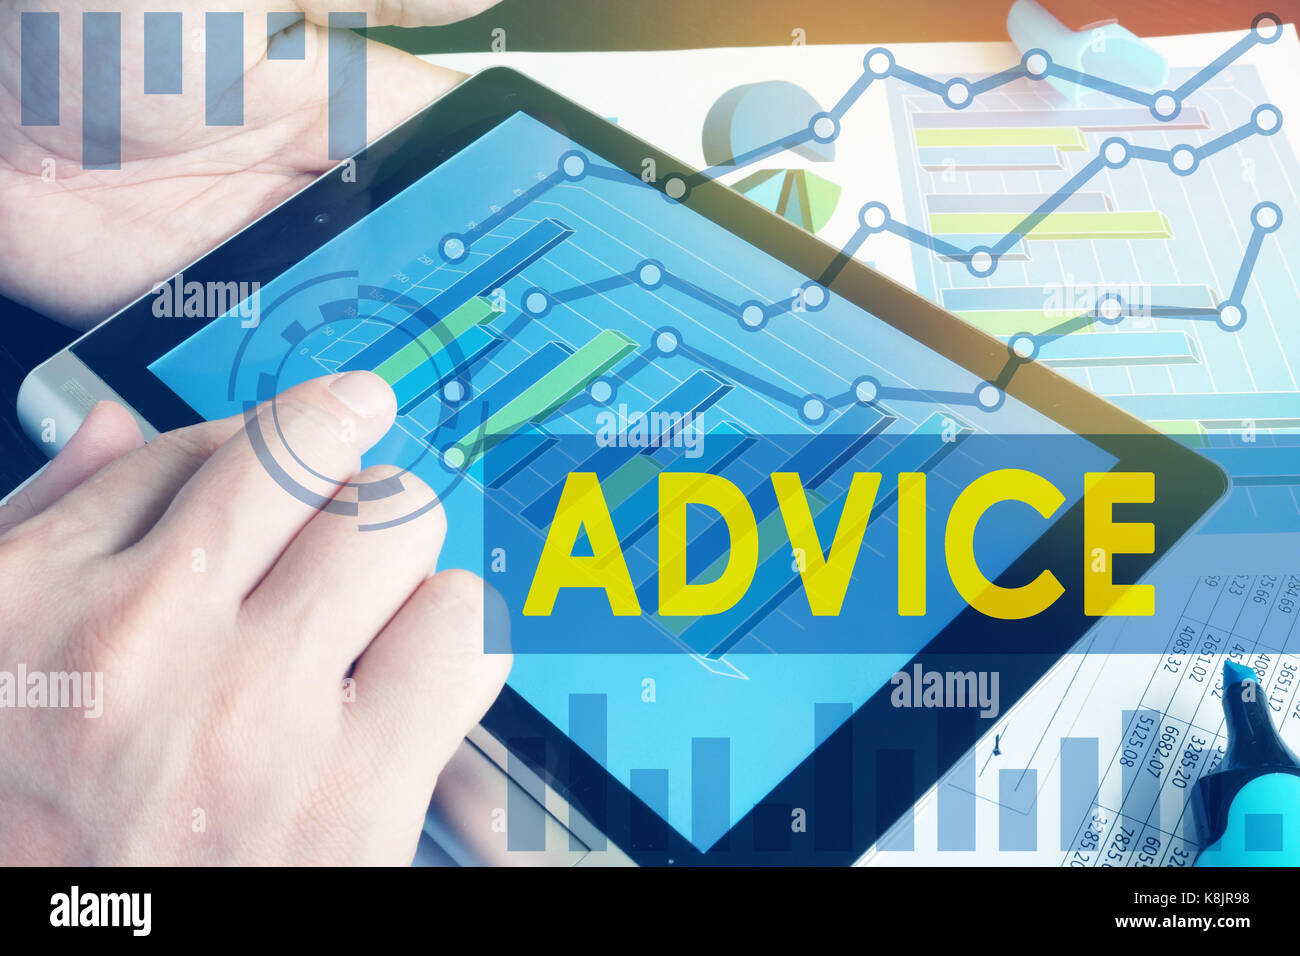 Expert advice for business and trading. Tablet and financial graphs. Stock Photo